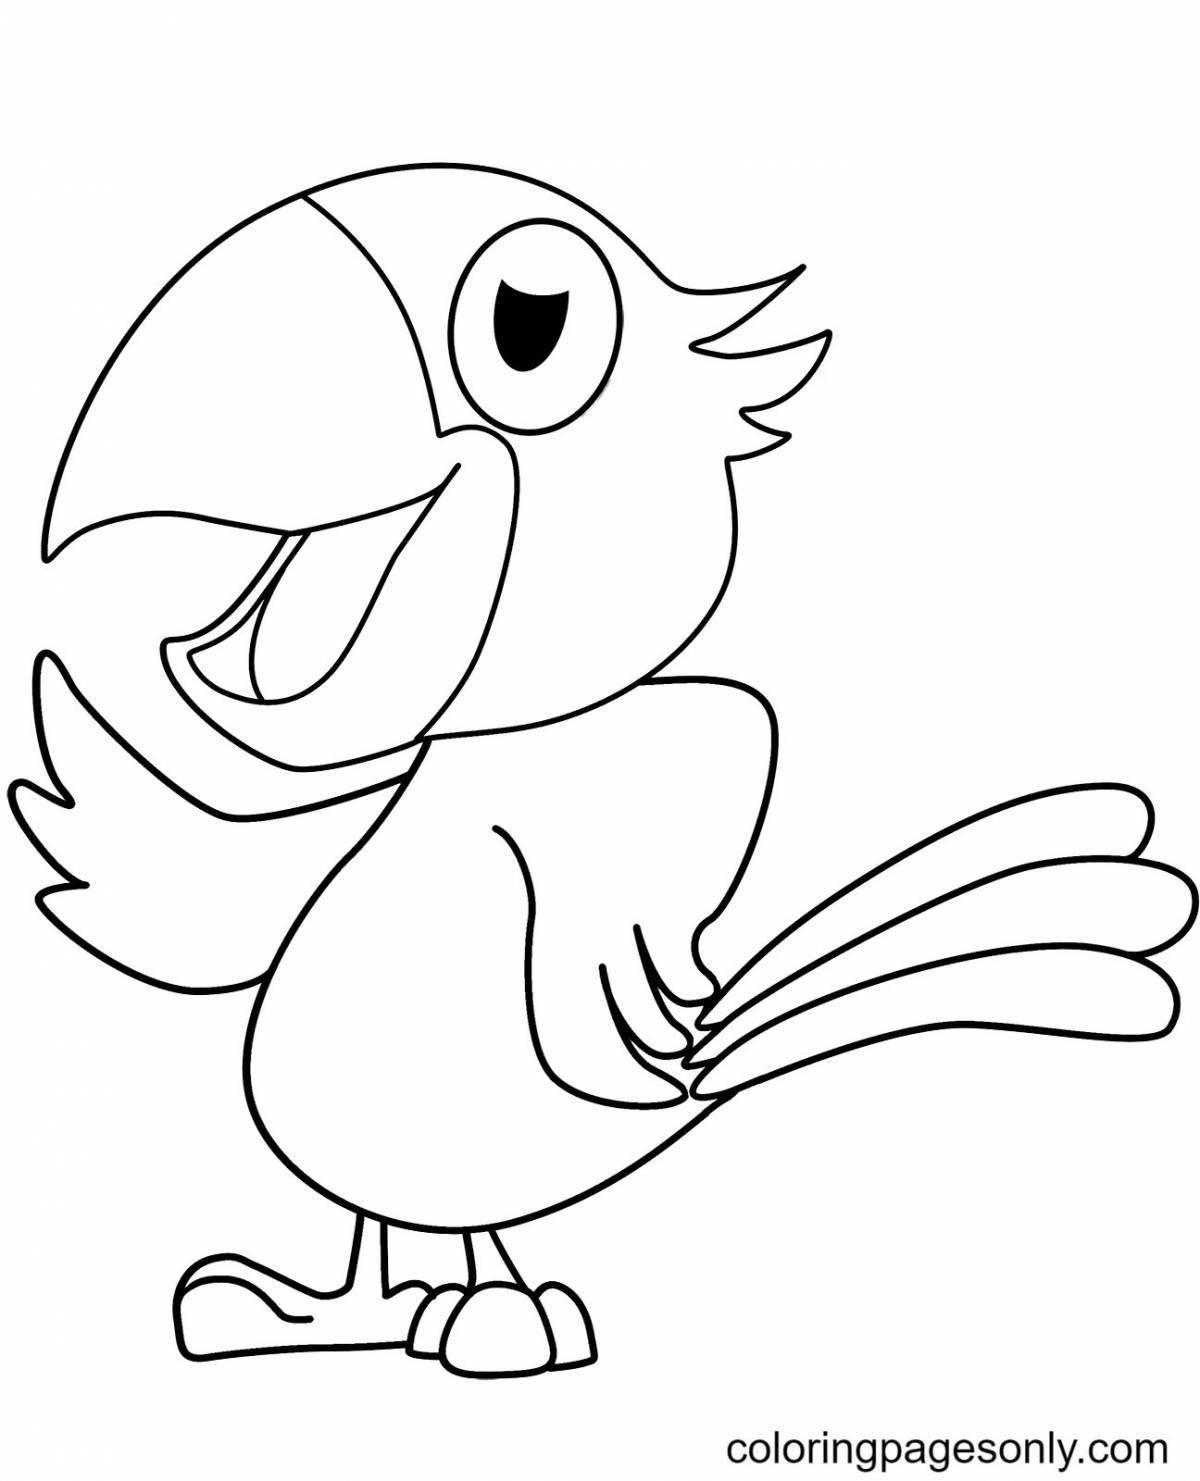 Attractive parrot coloring book